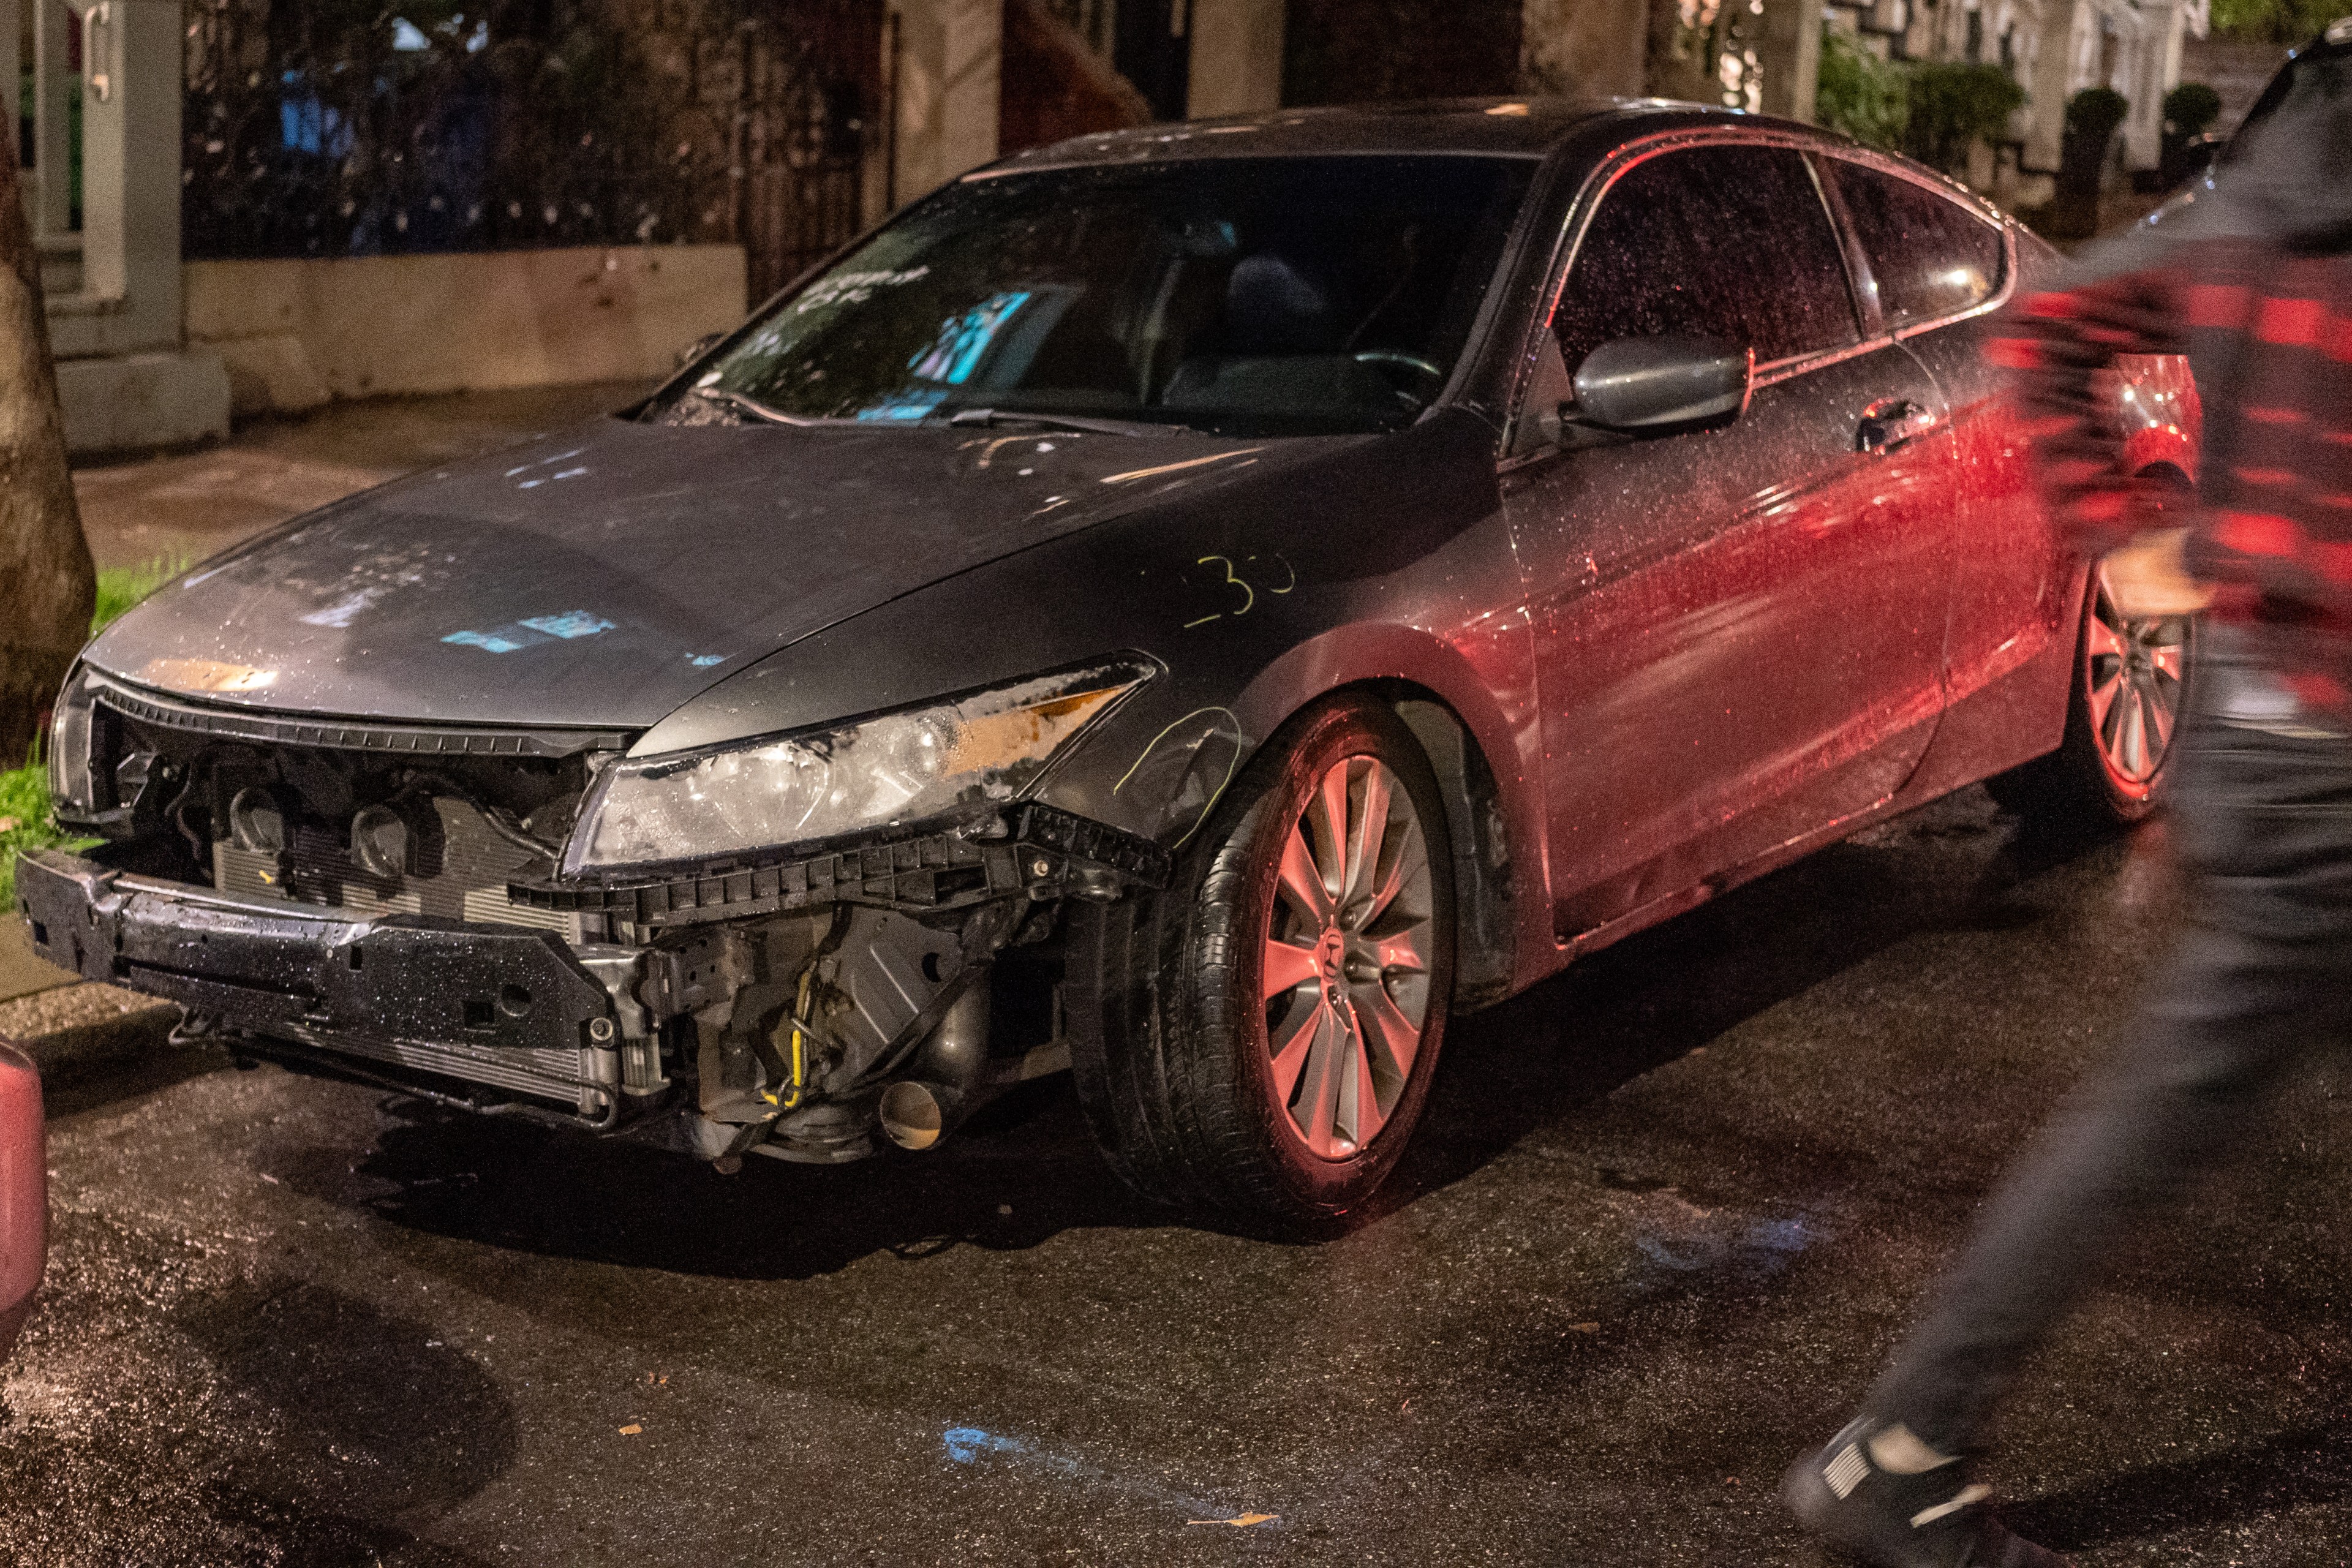 A damaged car with missing front bumper, exposed engine, and a blurred person walking by.